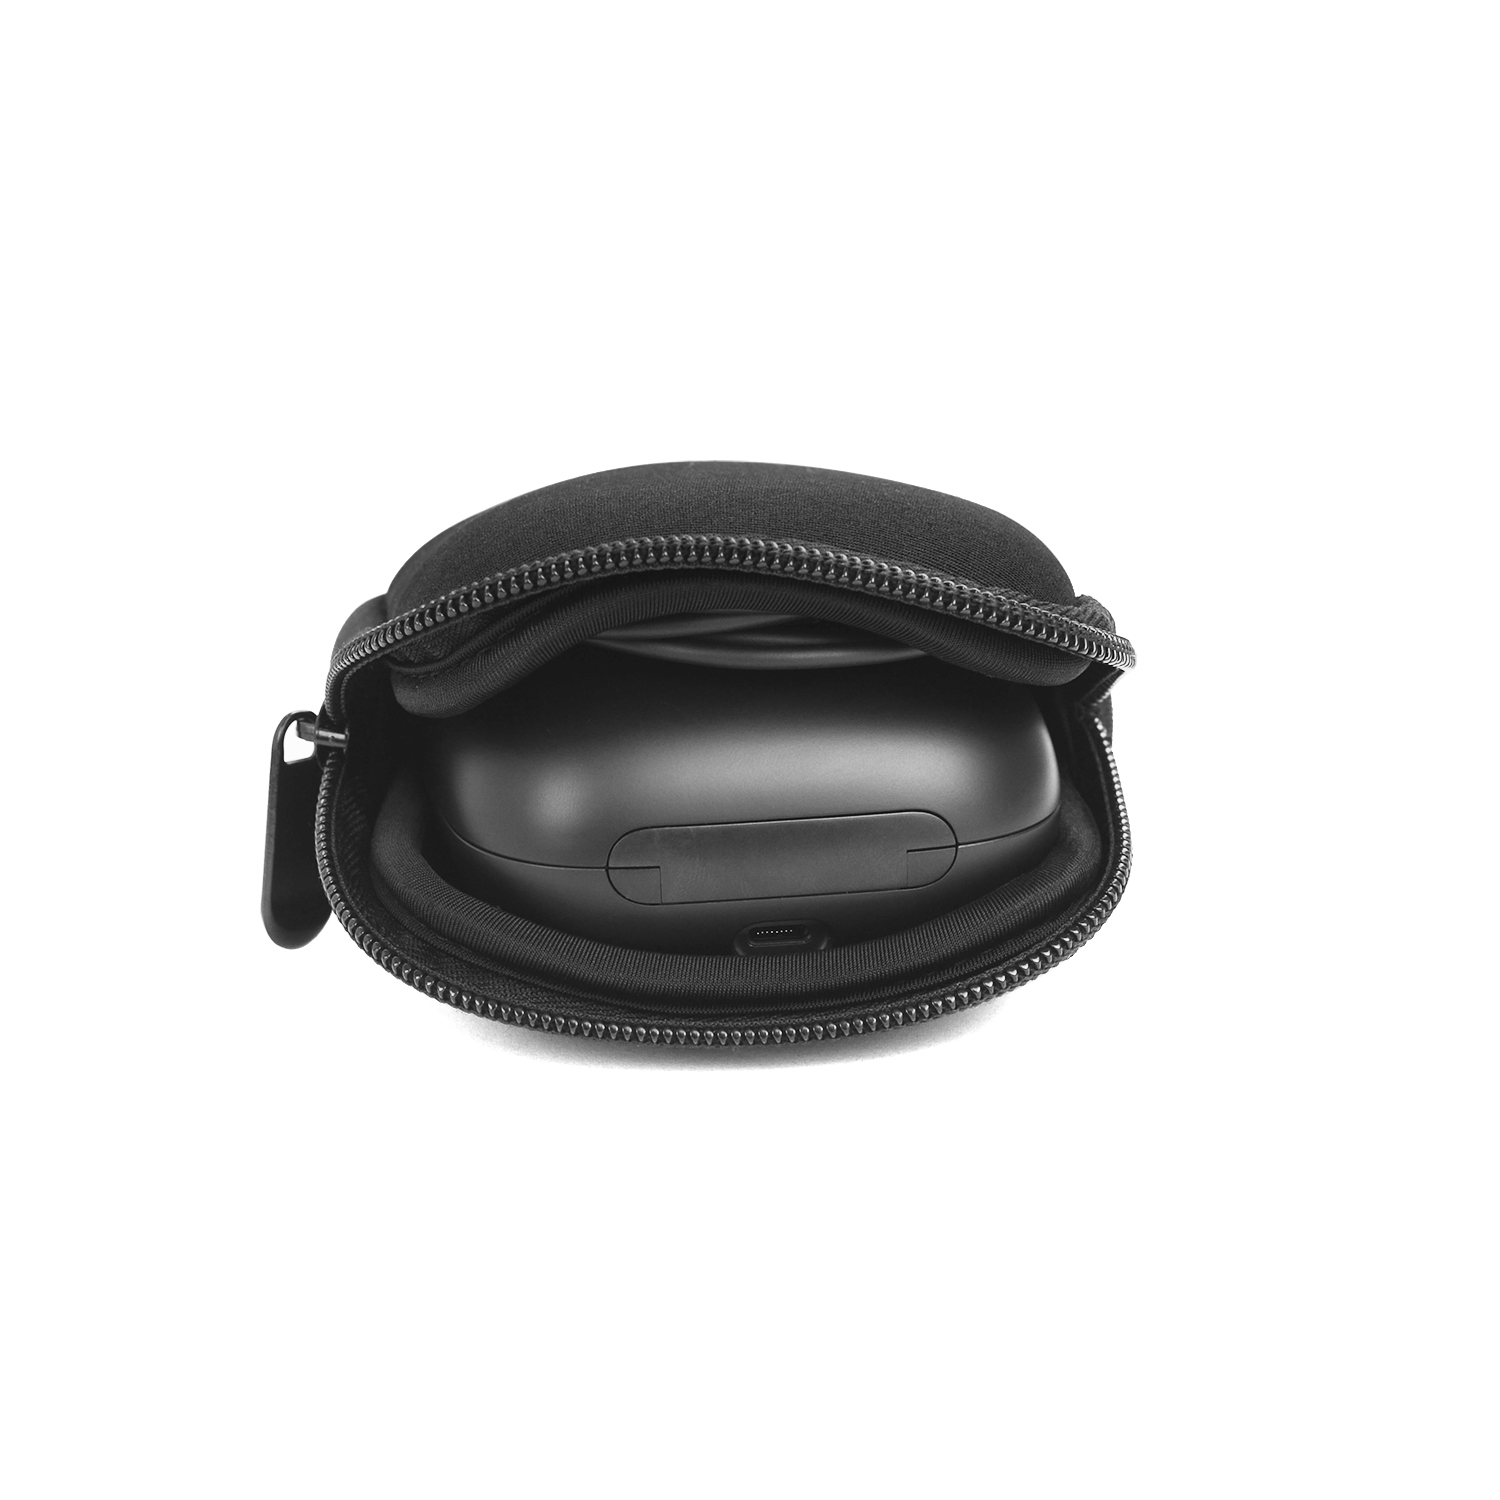 Bakeey Earphone Storage Bag Wireless bluetooth Headset Protective Carrying Case Dustproof Portable Soft Bag for Powerbeats Pro